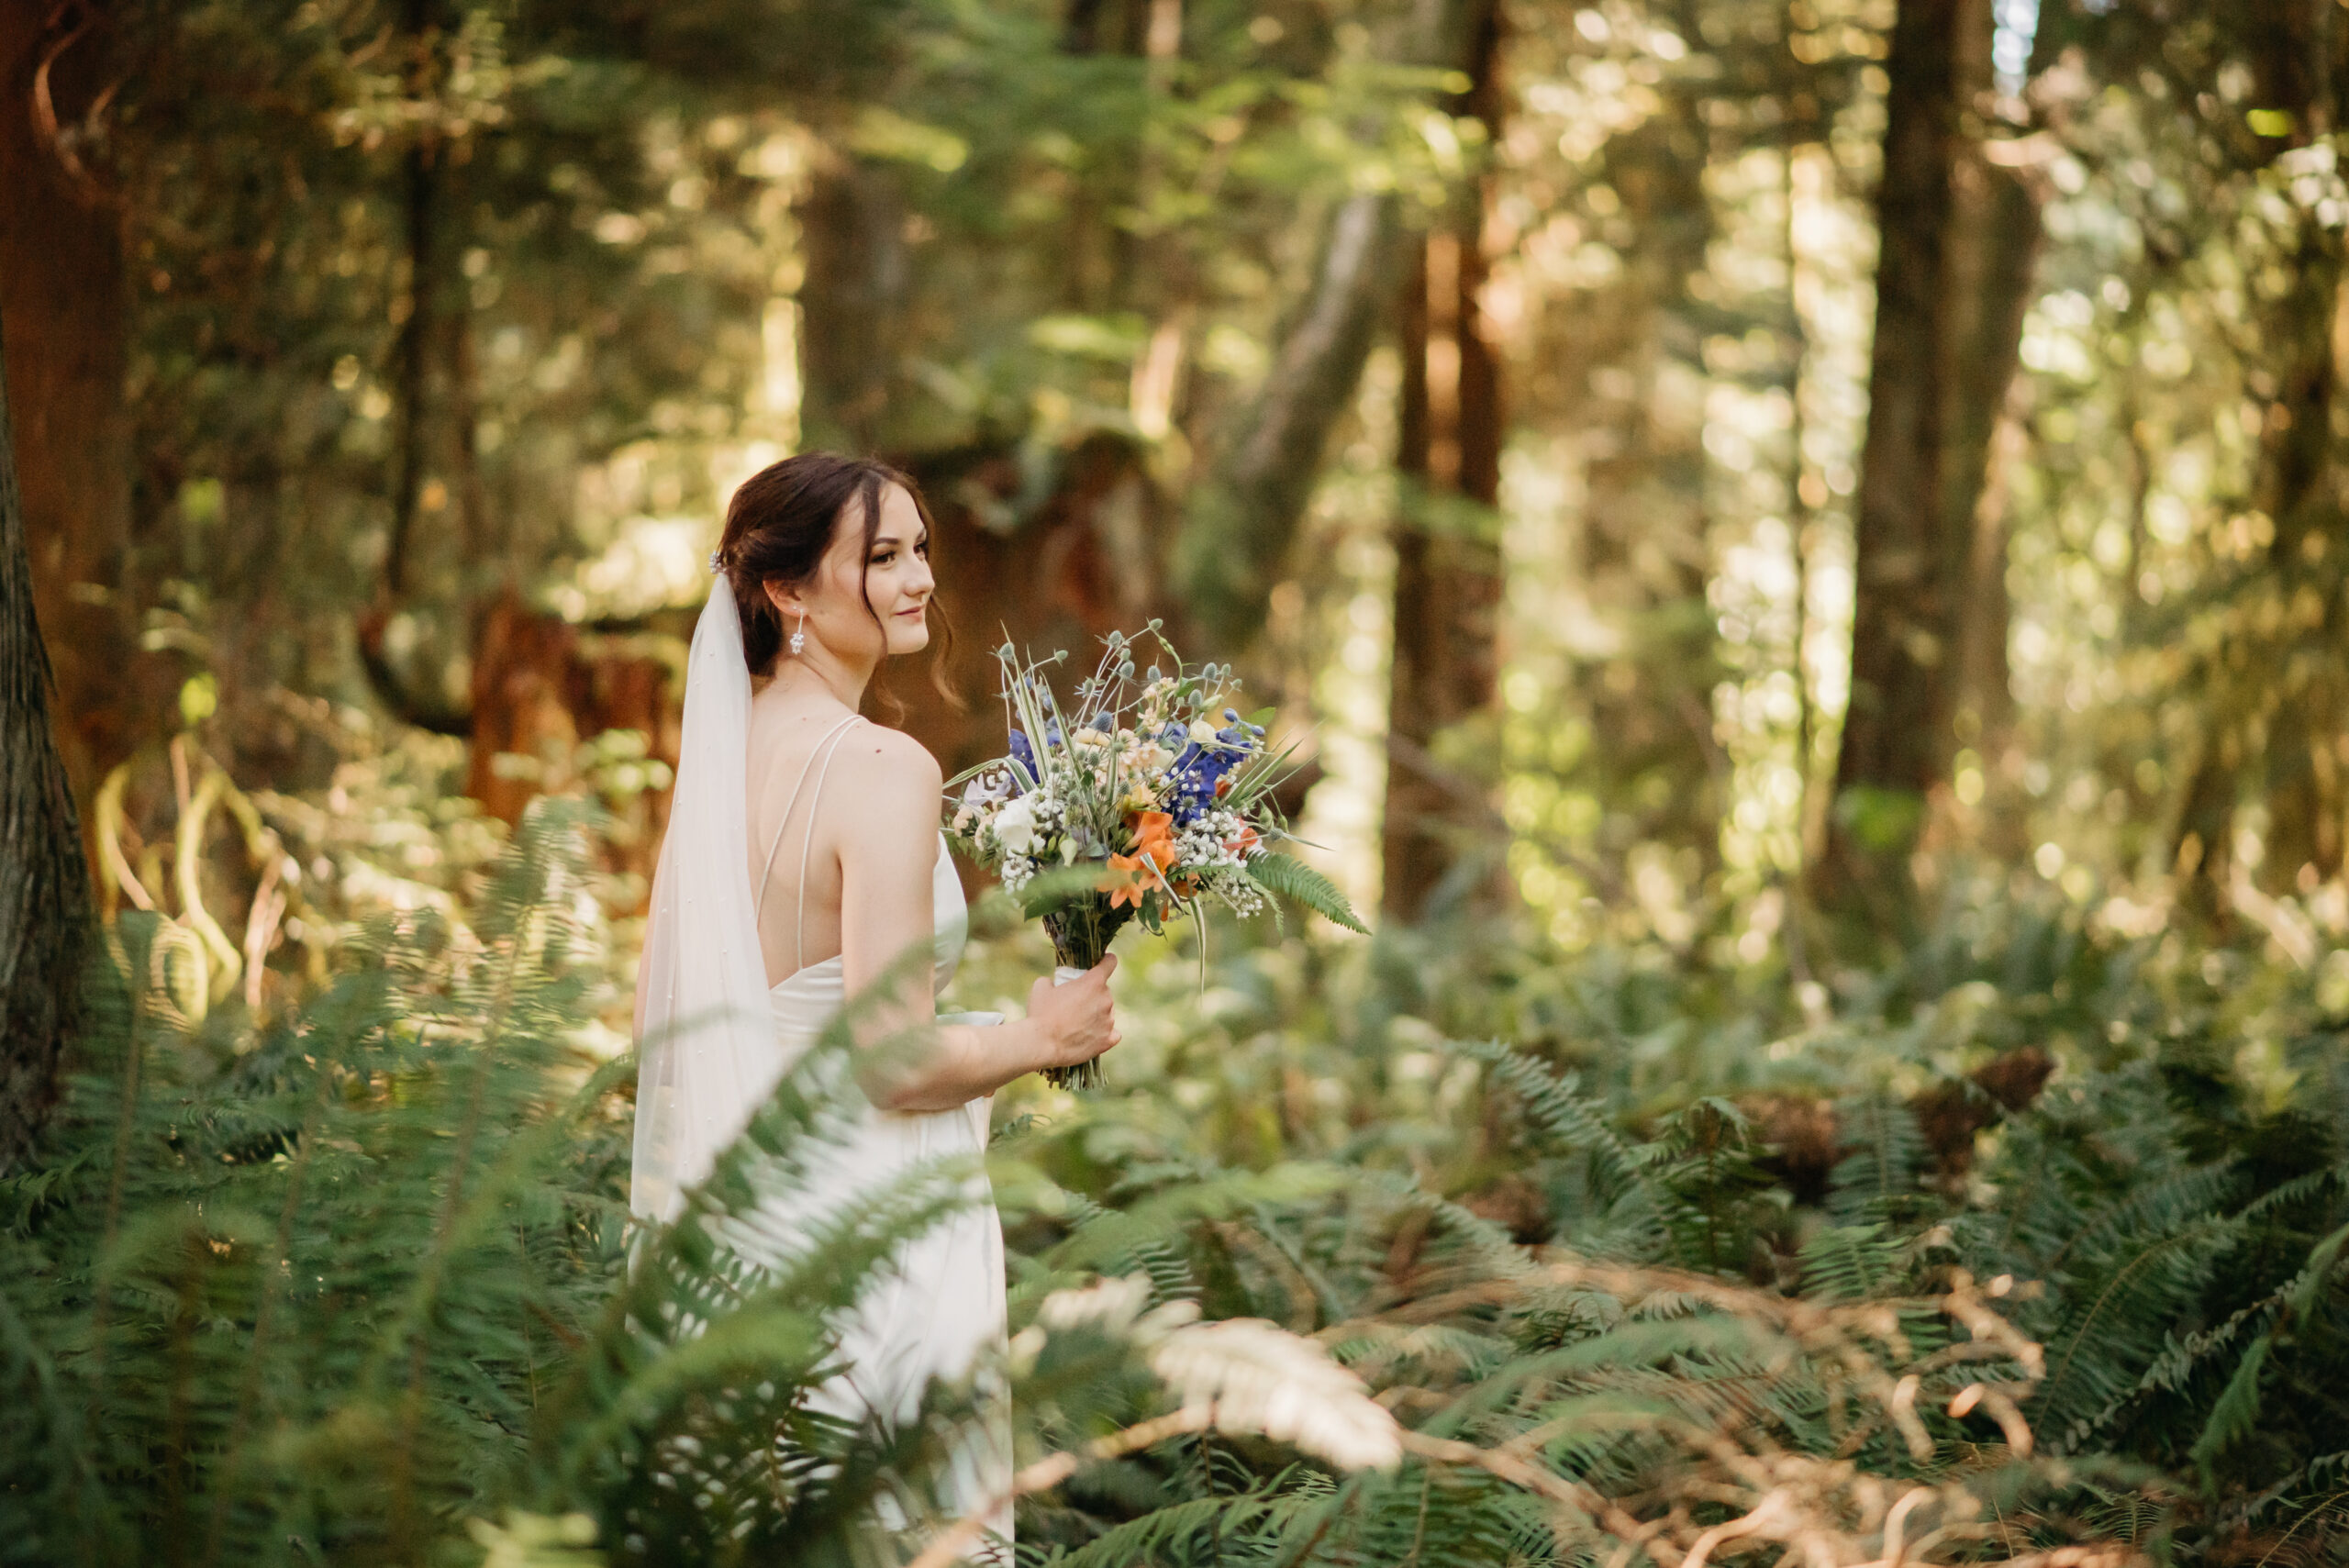 Portrait of bride in forest on her wedding day